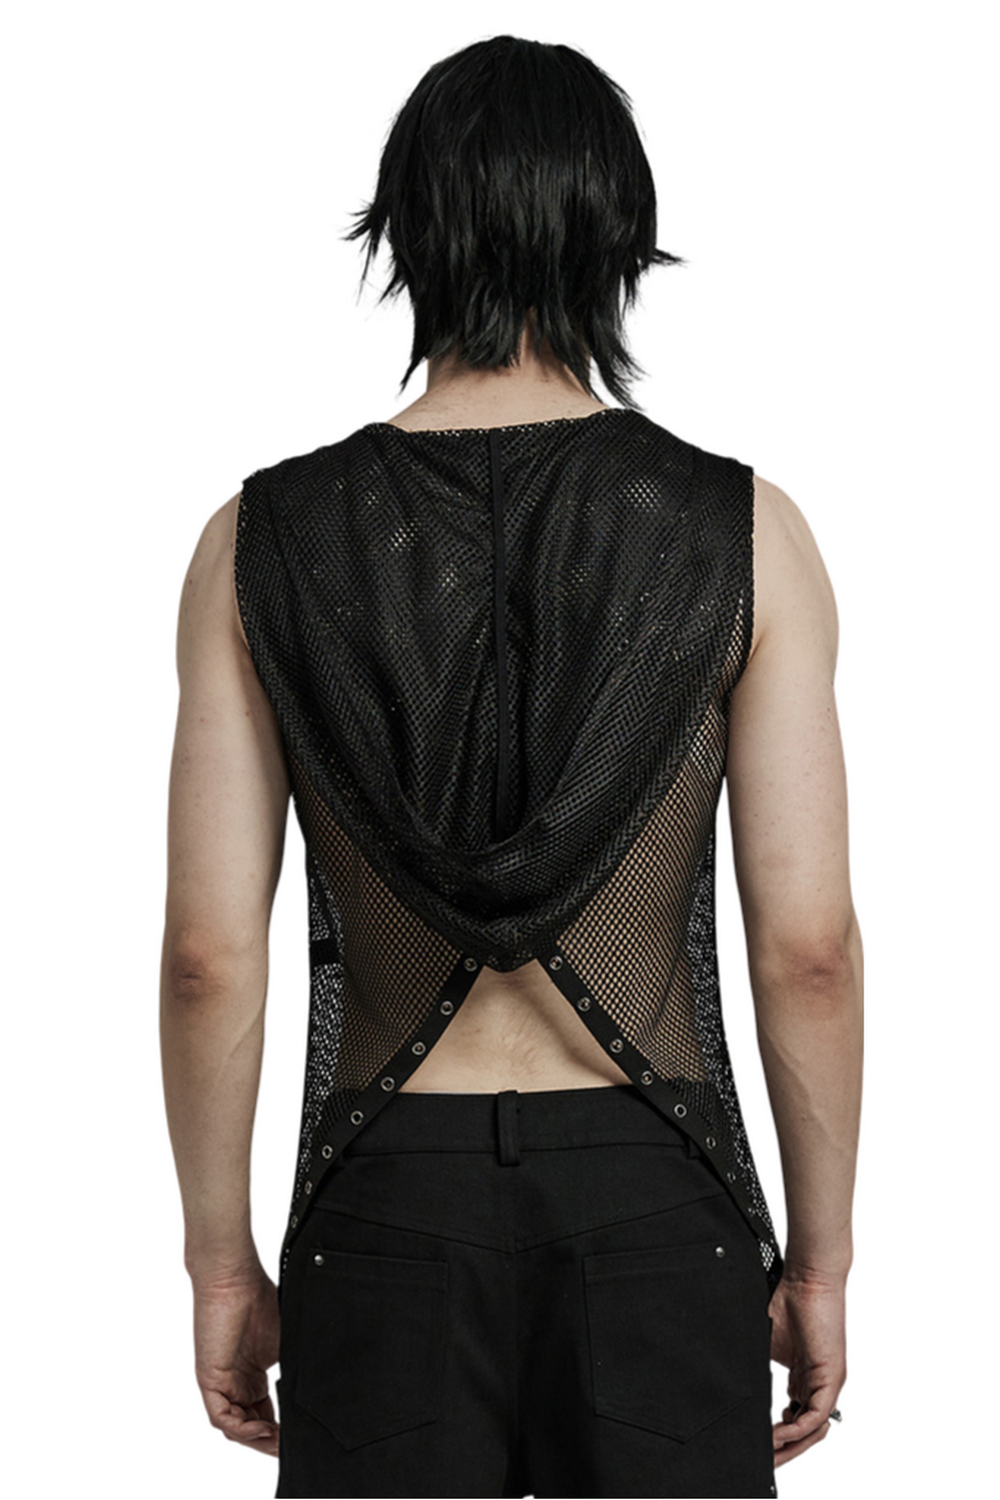 Gothic Mesh Hooded Vest / Sexy Punk Hollow Out Design Top